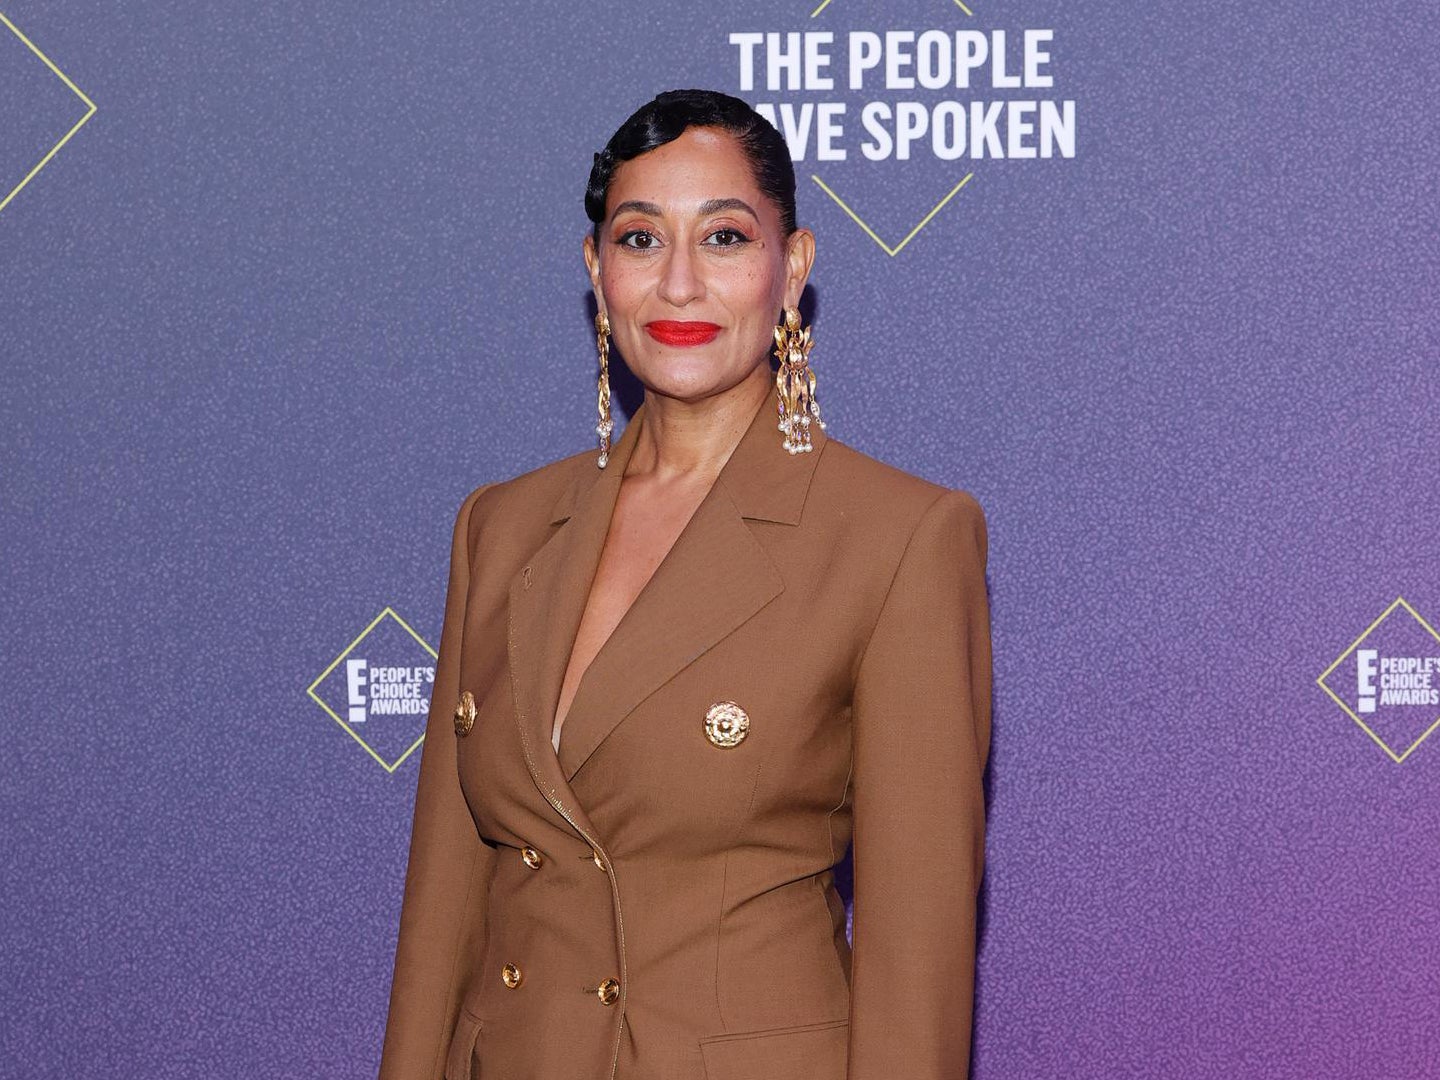 Tracee Ellis Ross Honored As Style Icon At The 2020 People's Choice Awards